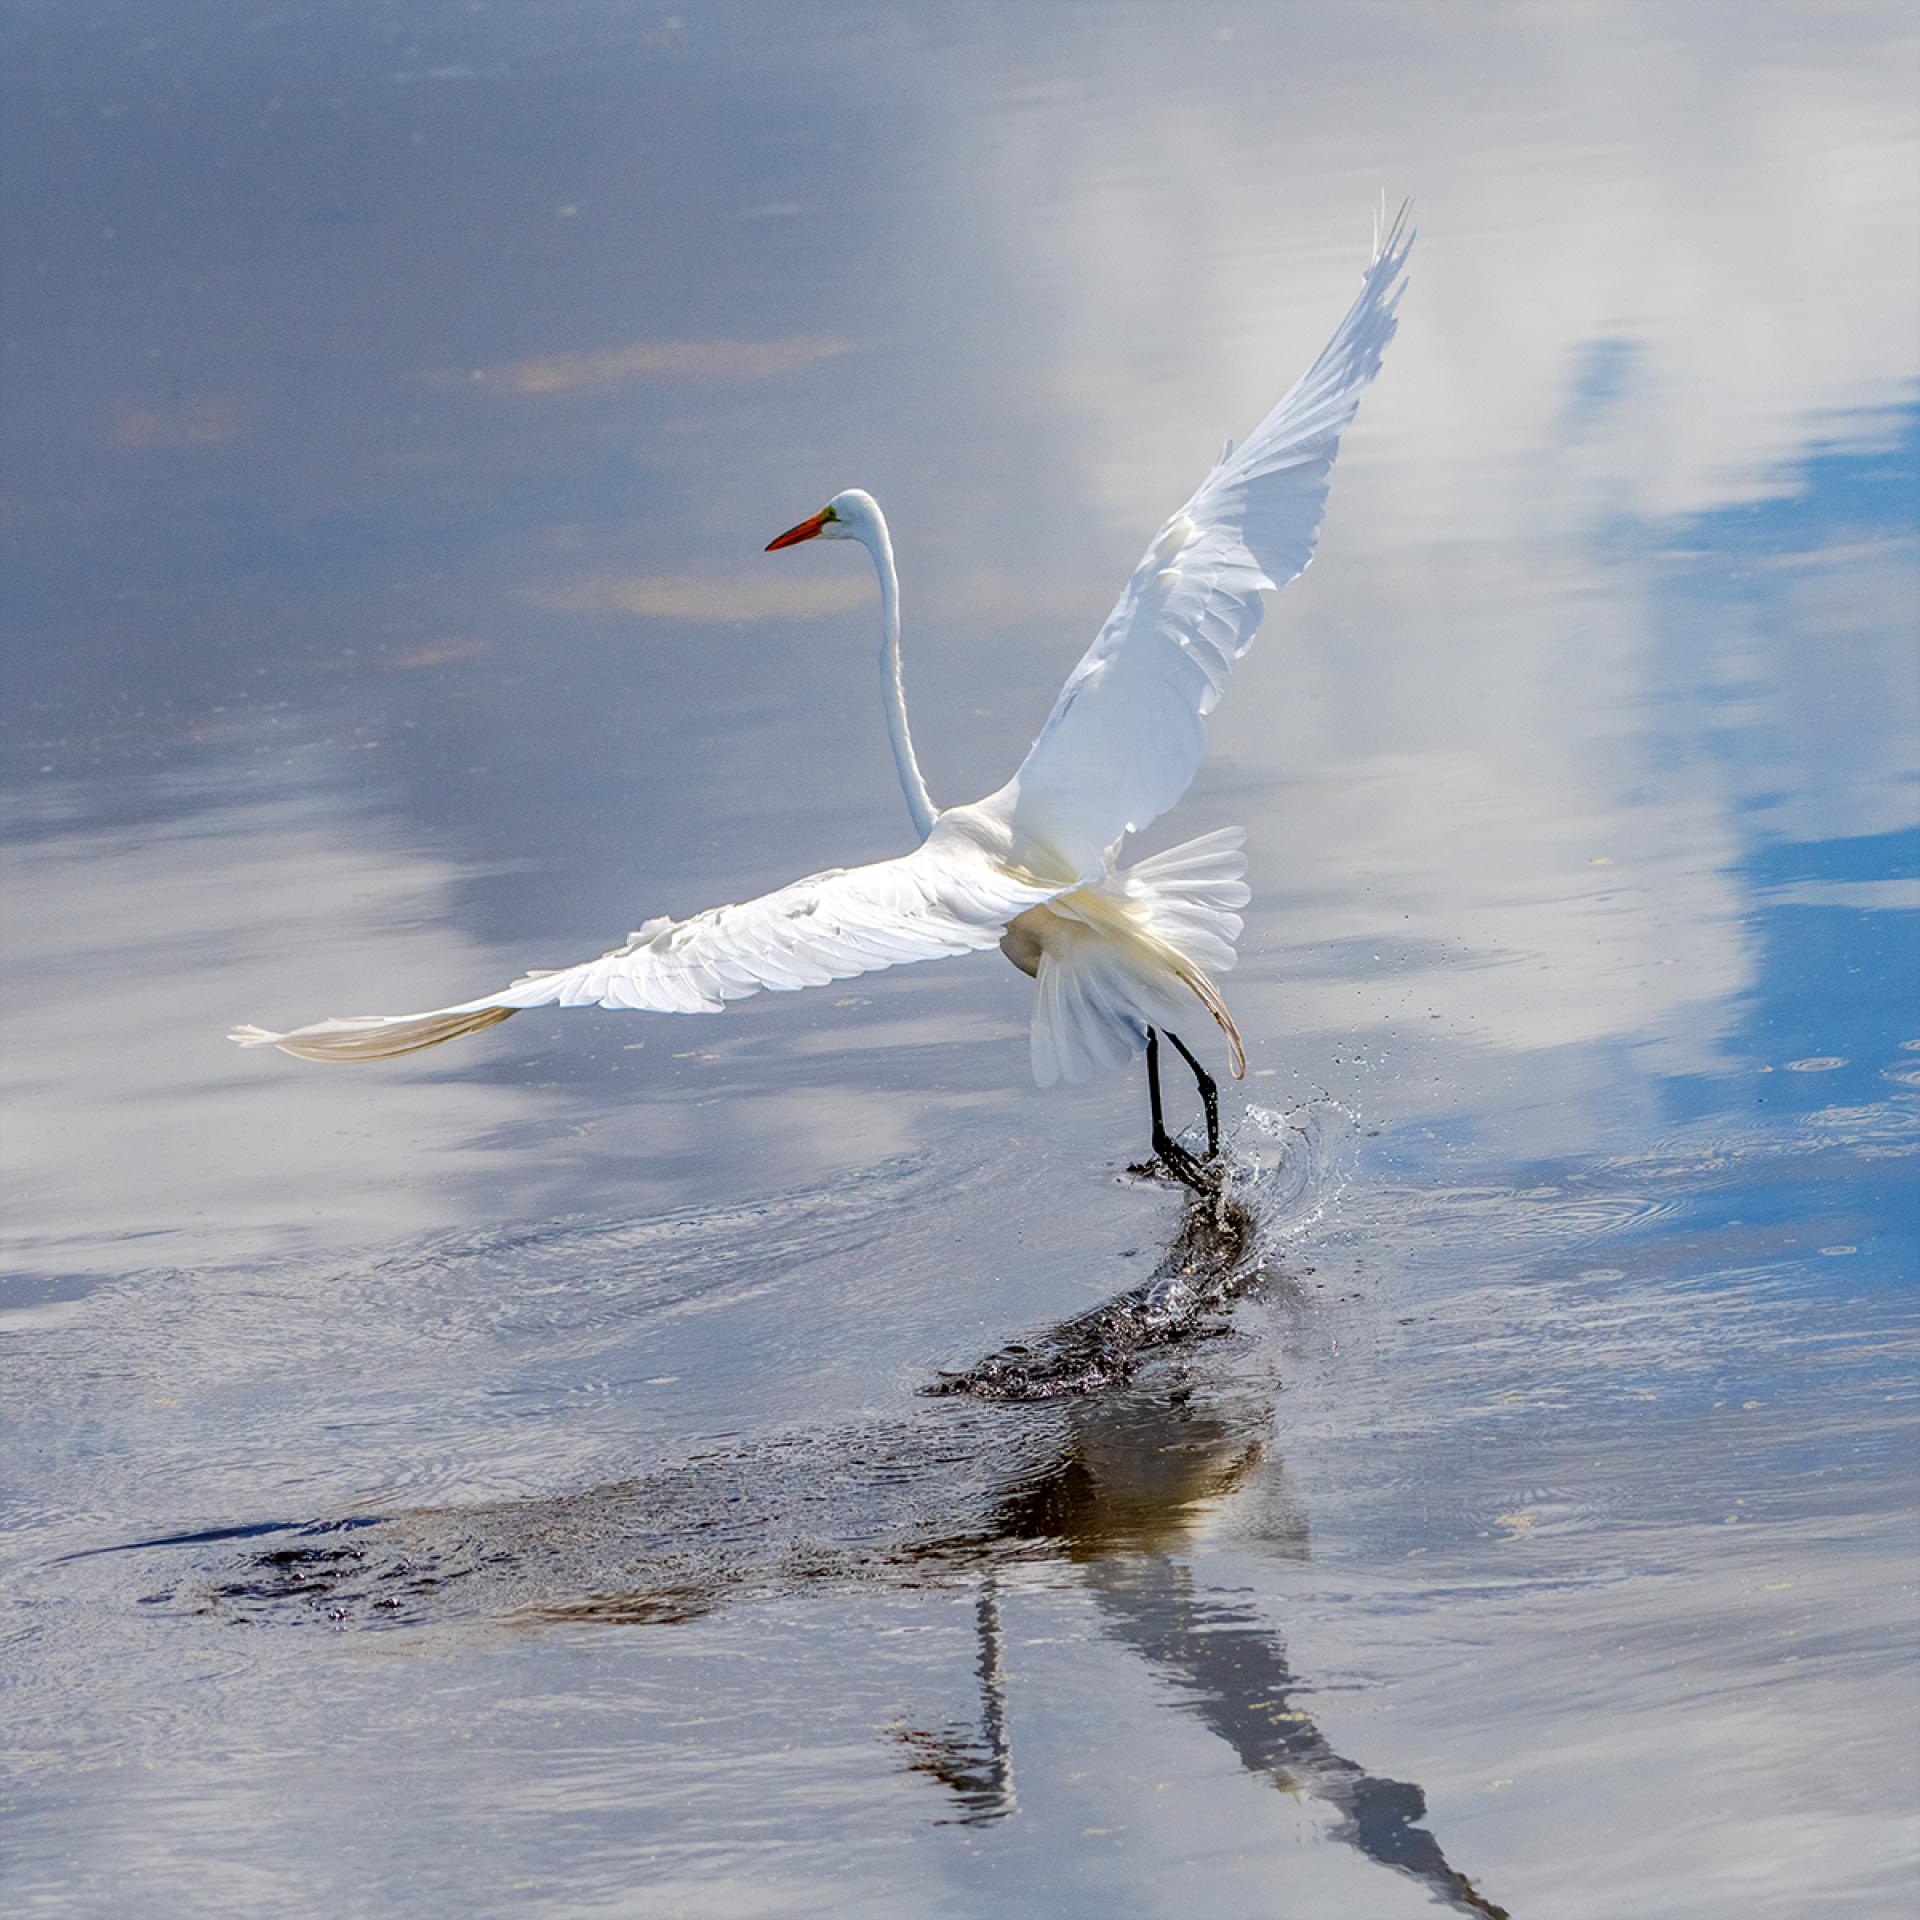 European Photography Awards Winner - The Skating Moment of a Great Egret